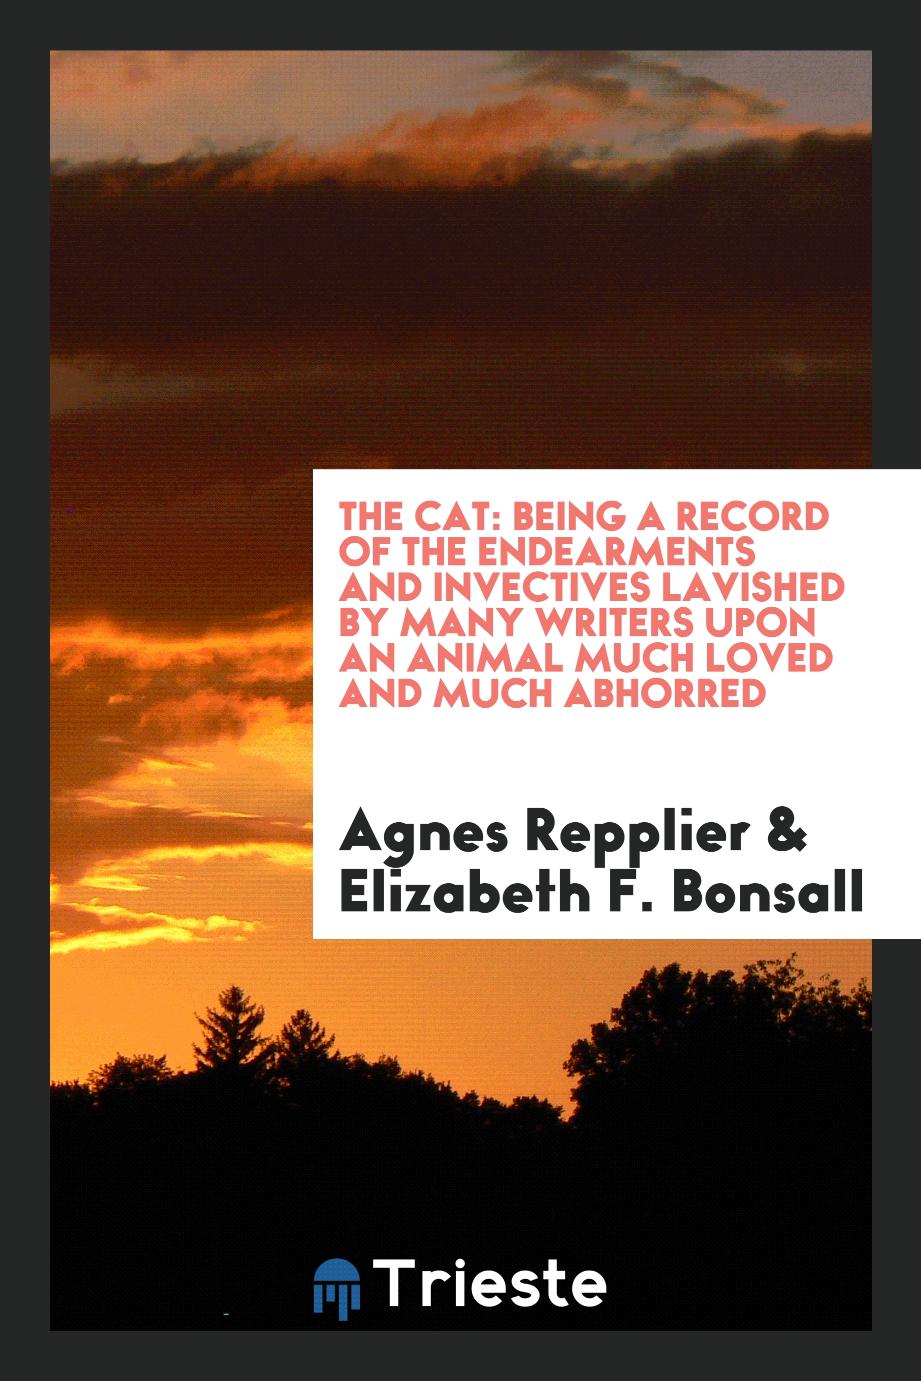 The cat: being a record of the endearments and invectives lavished by many writers upon an animal much loved and much abhorred